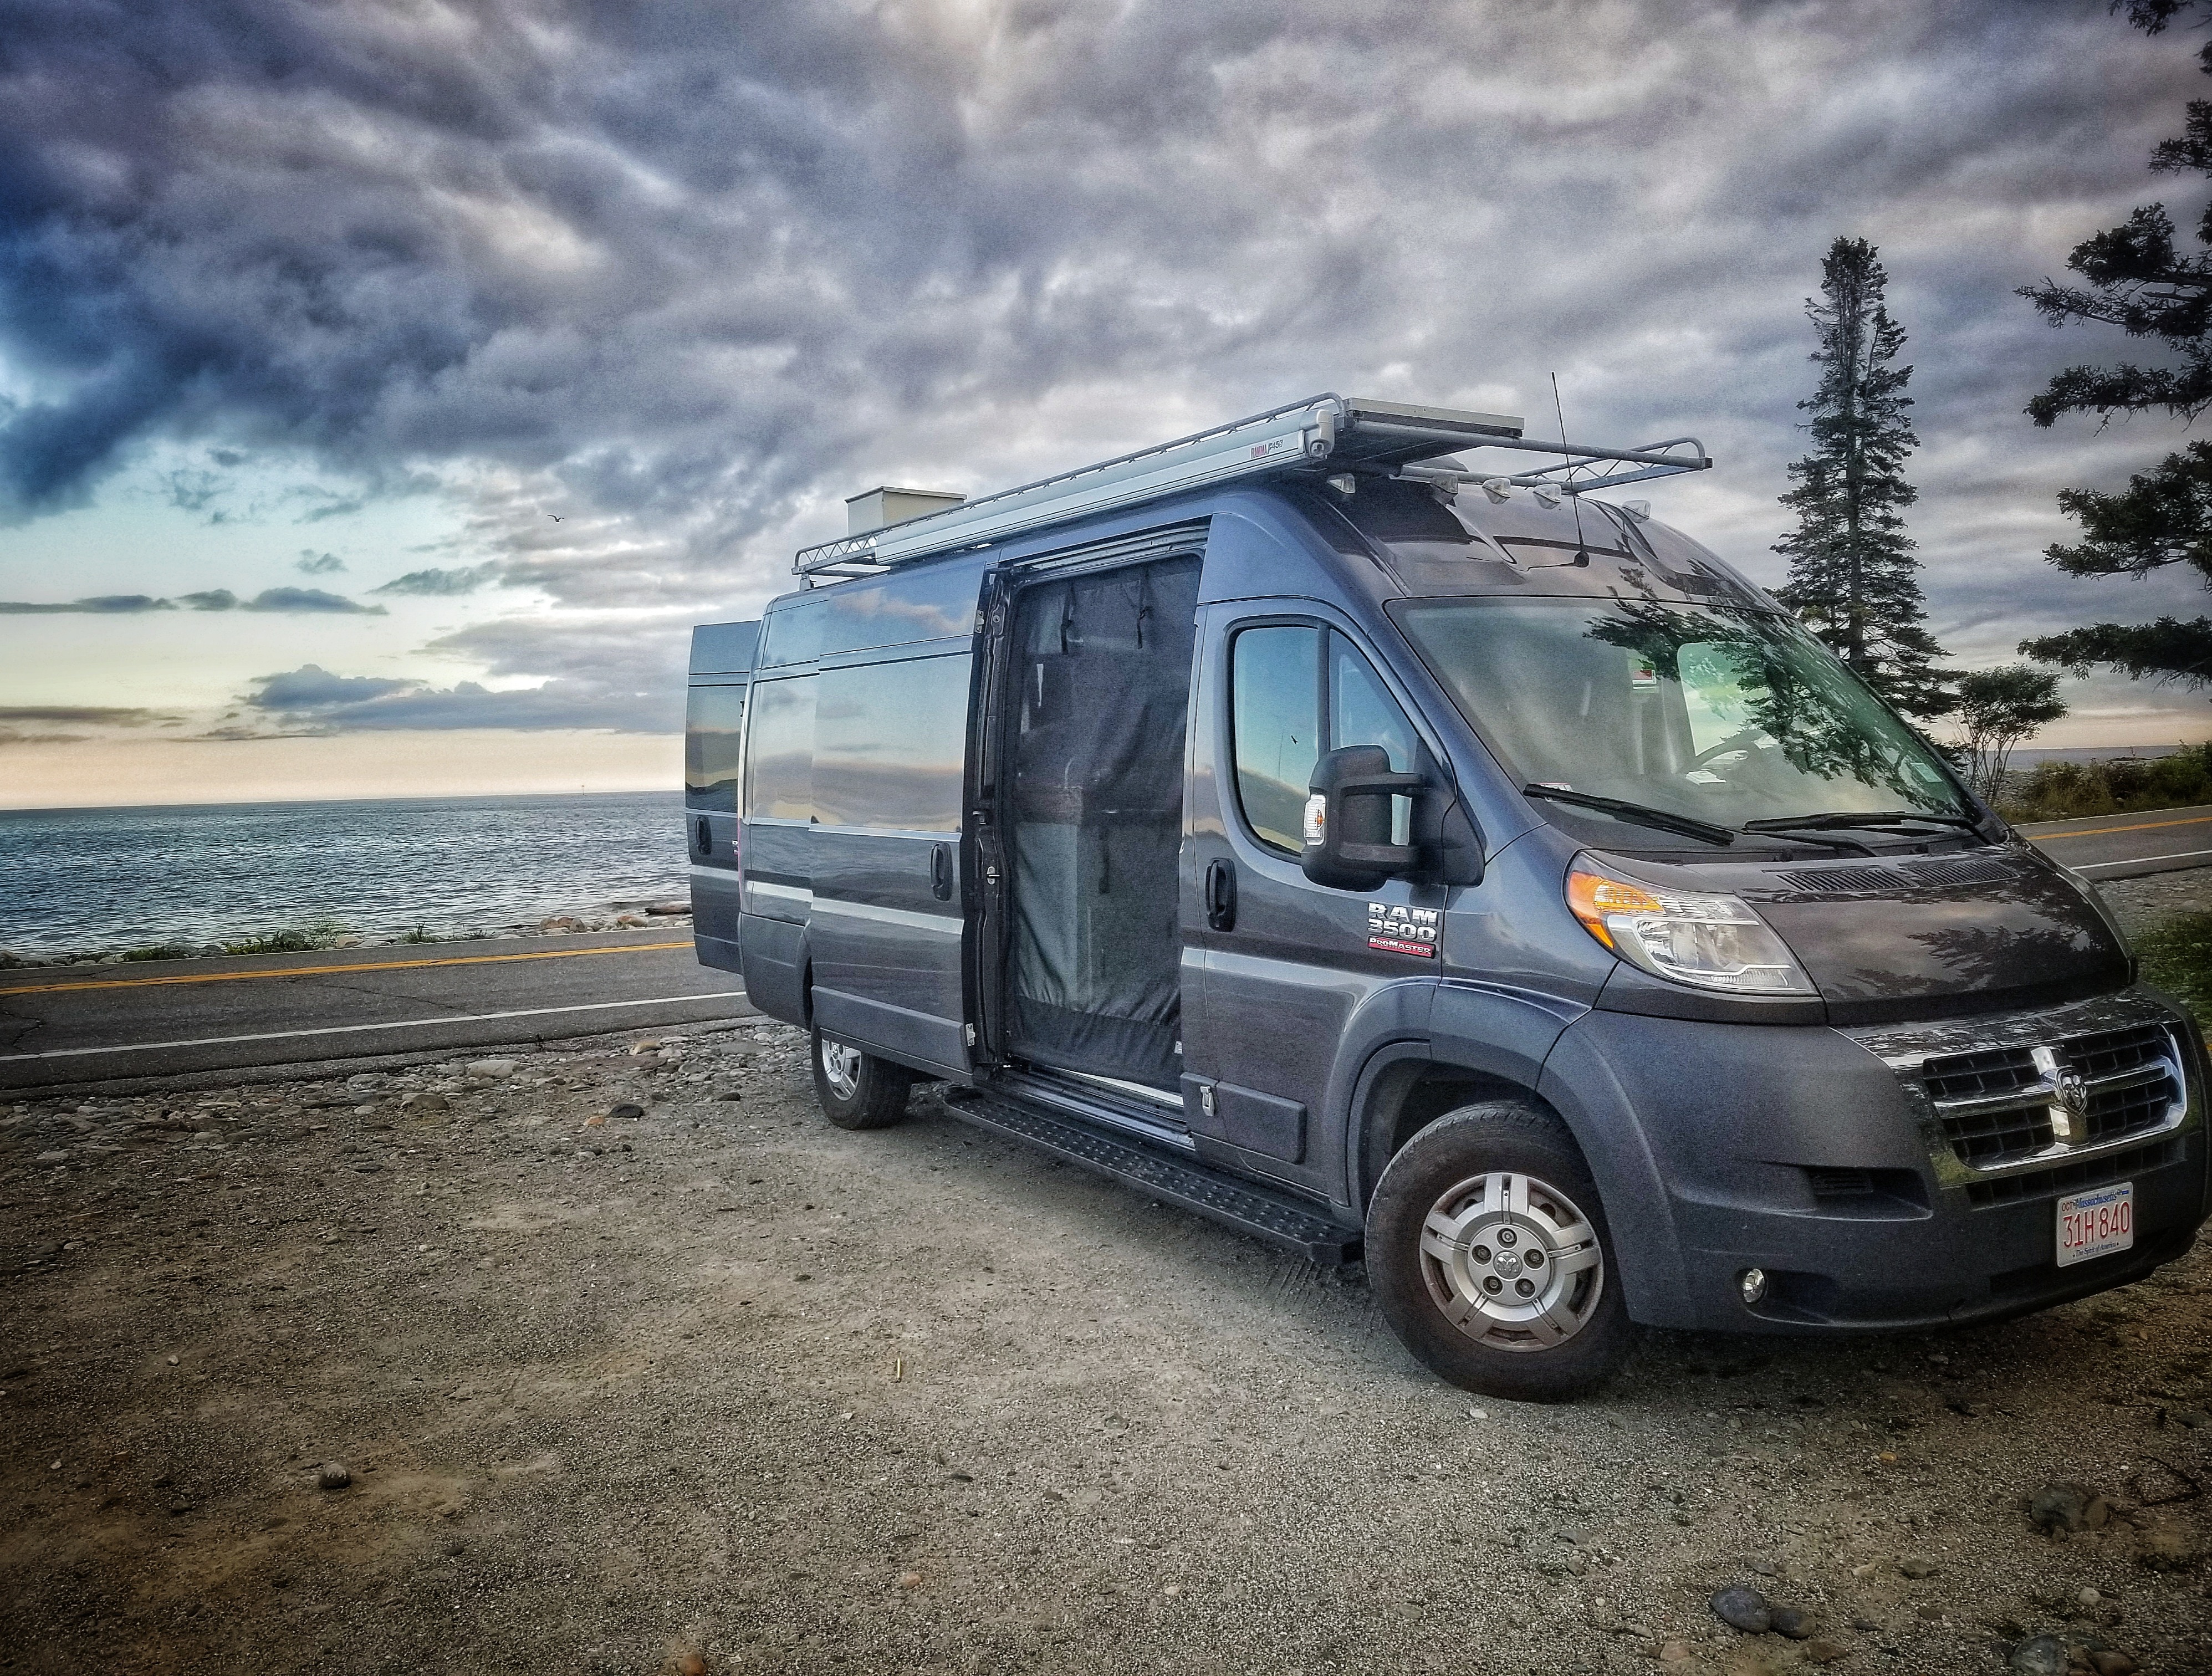 2016 Dodge Promaster 3500 extended high roof Camper van Rental in Norwood,  MA | Outdoorsy